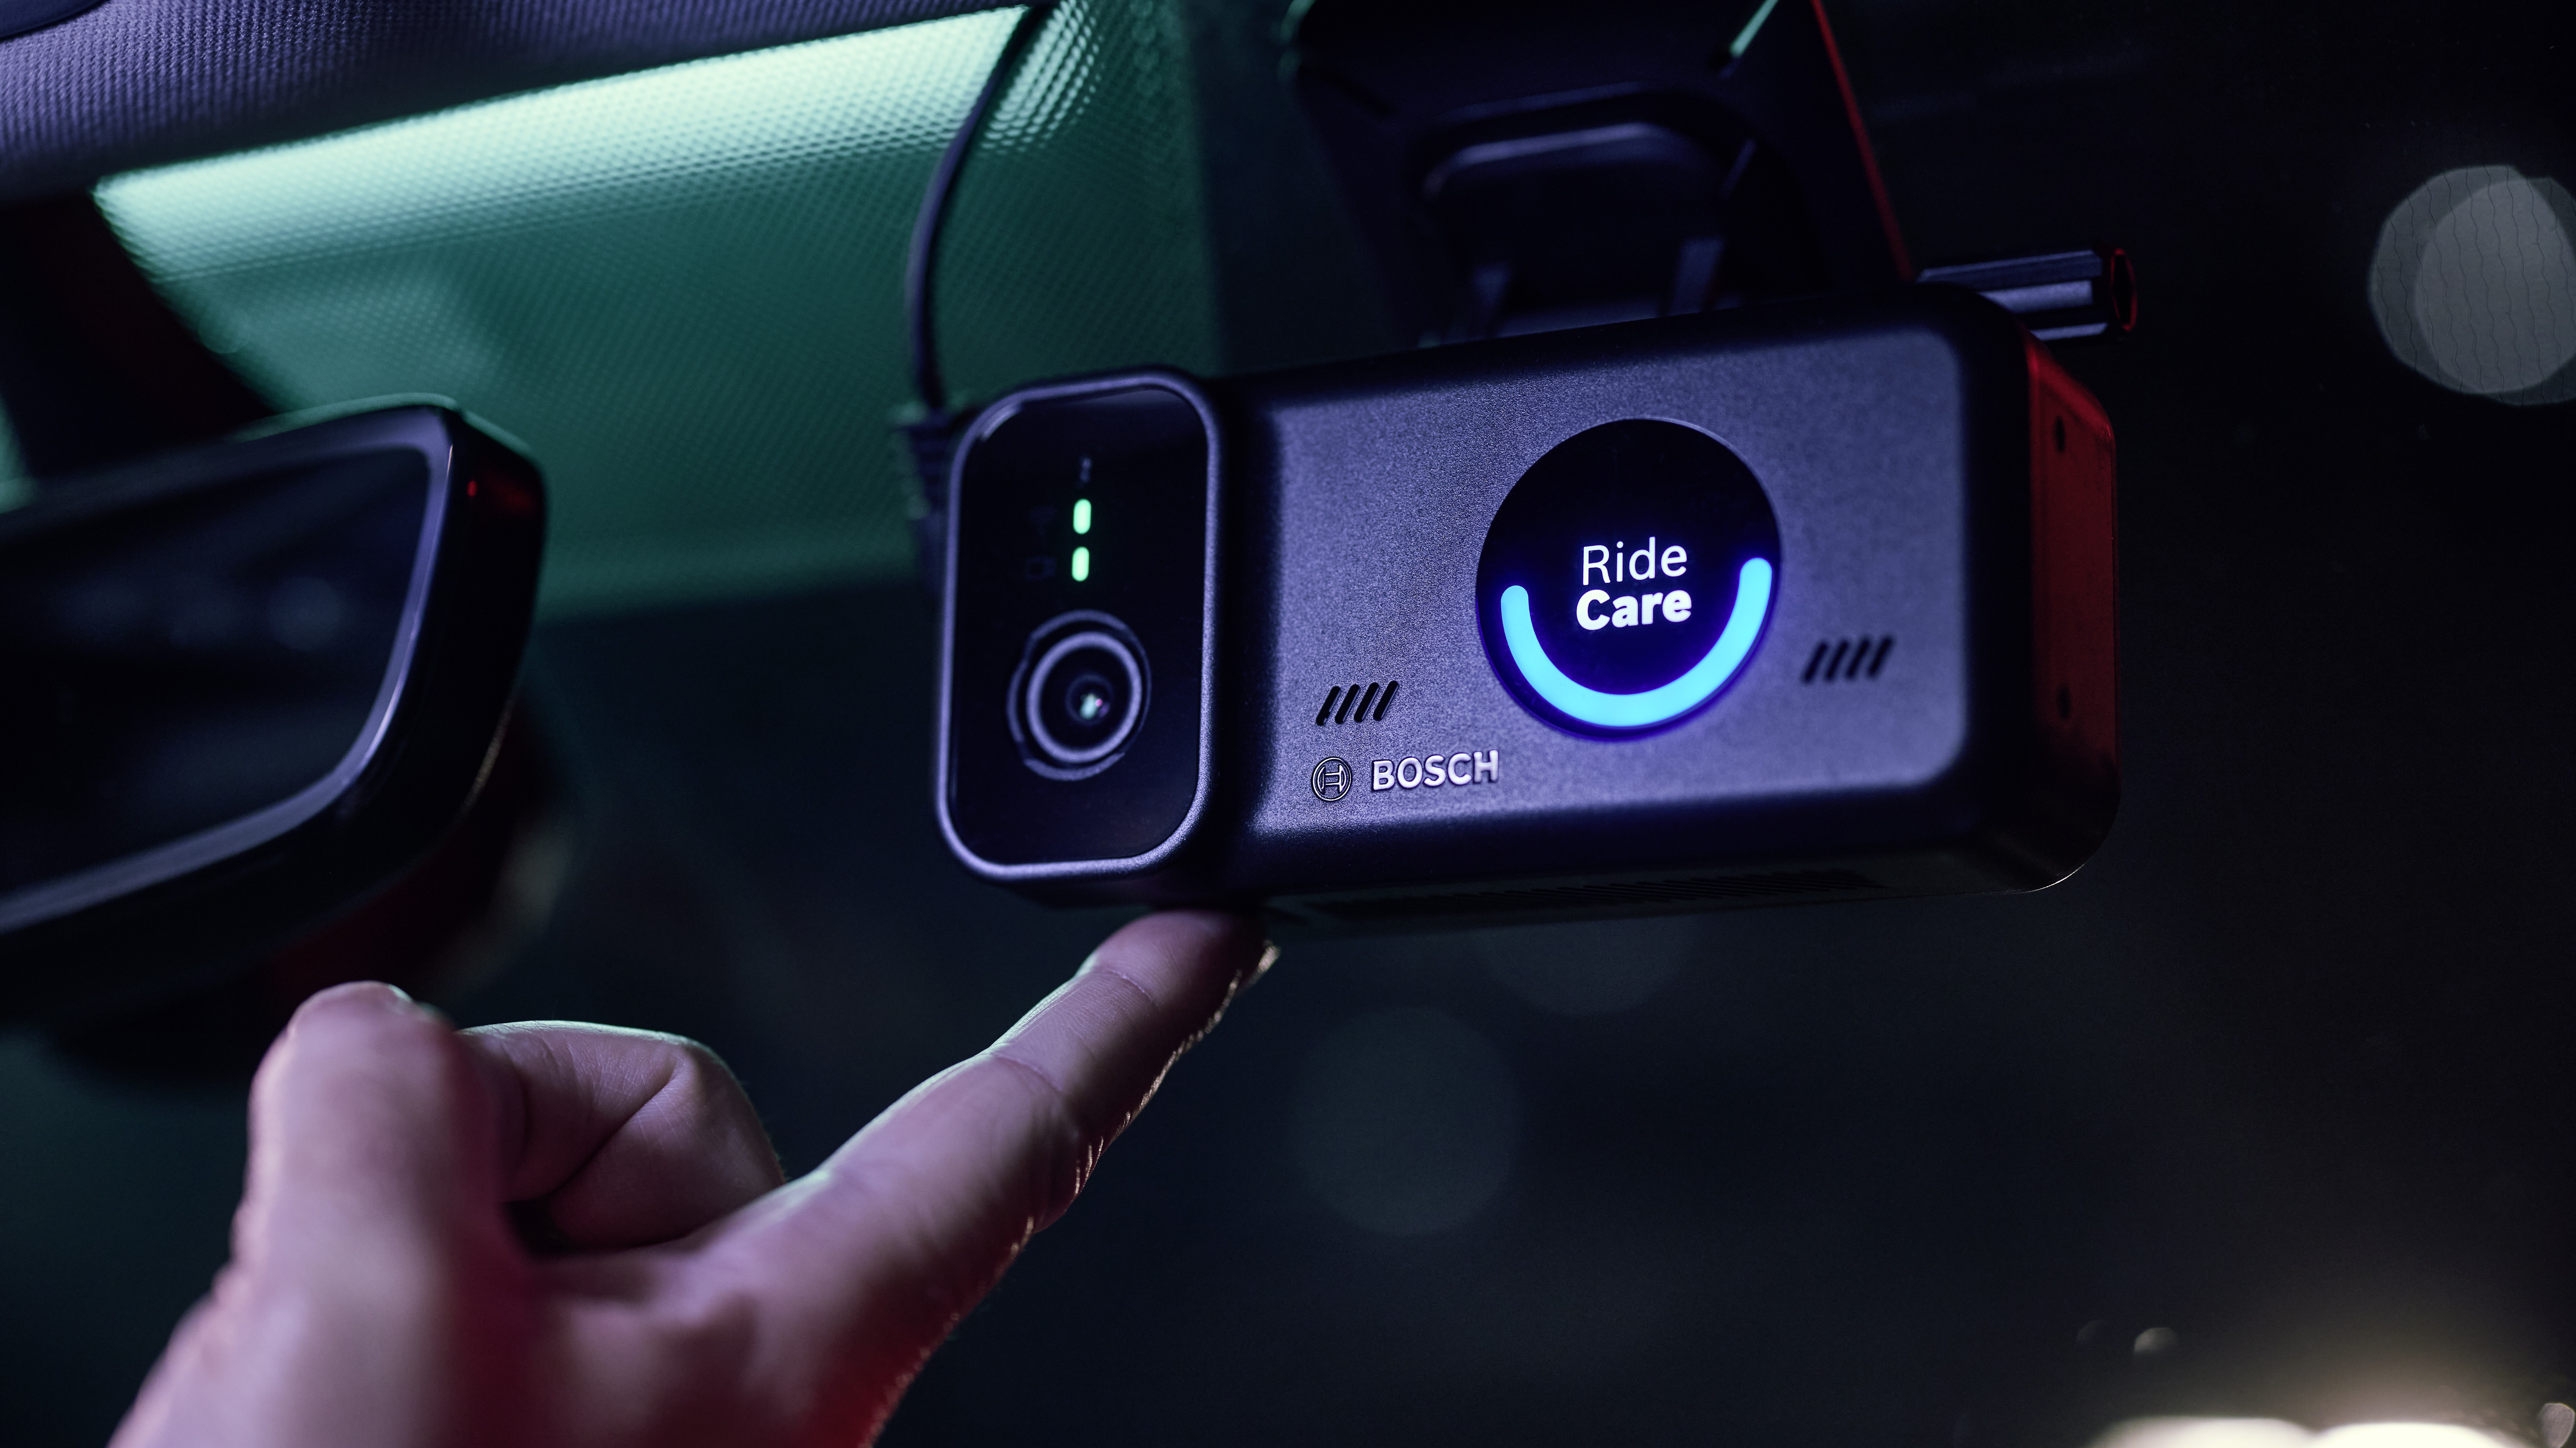 Bosch sensors, AI and connectivity expertise enable RideCare companion feature set